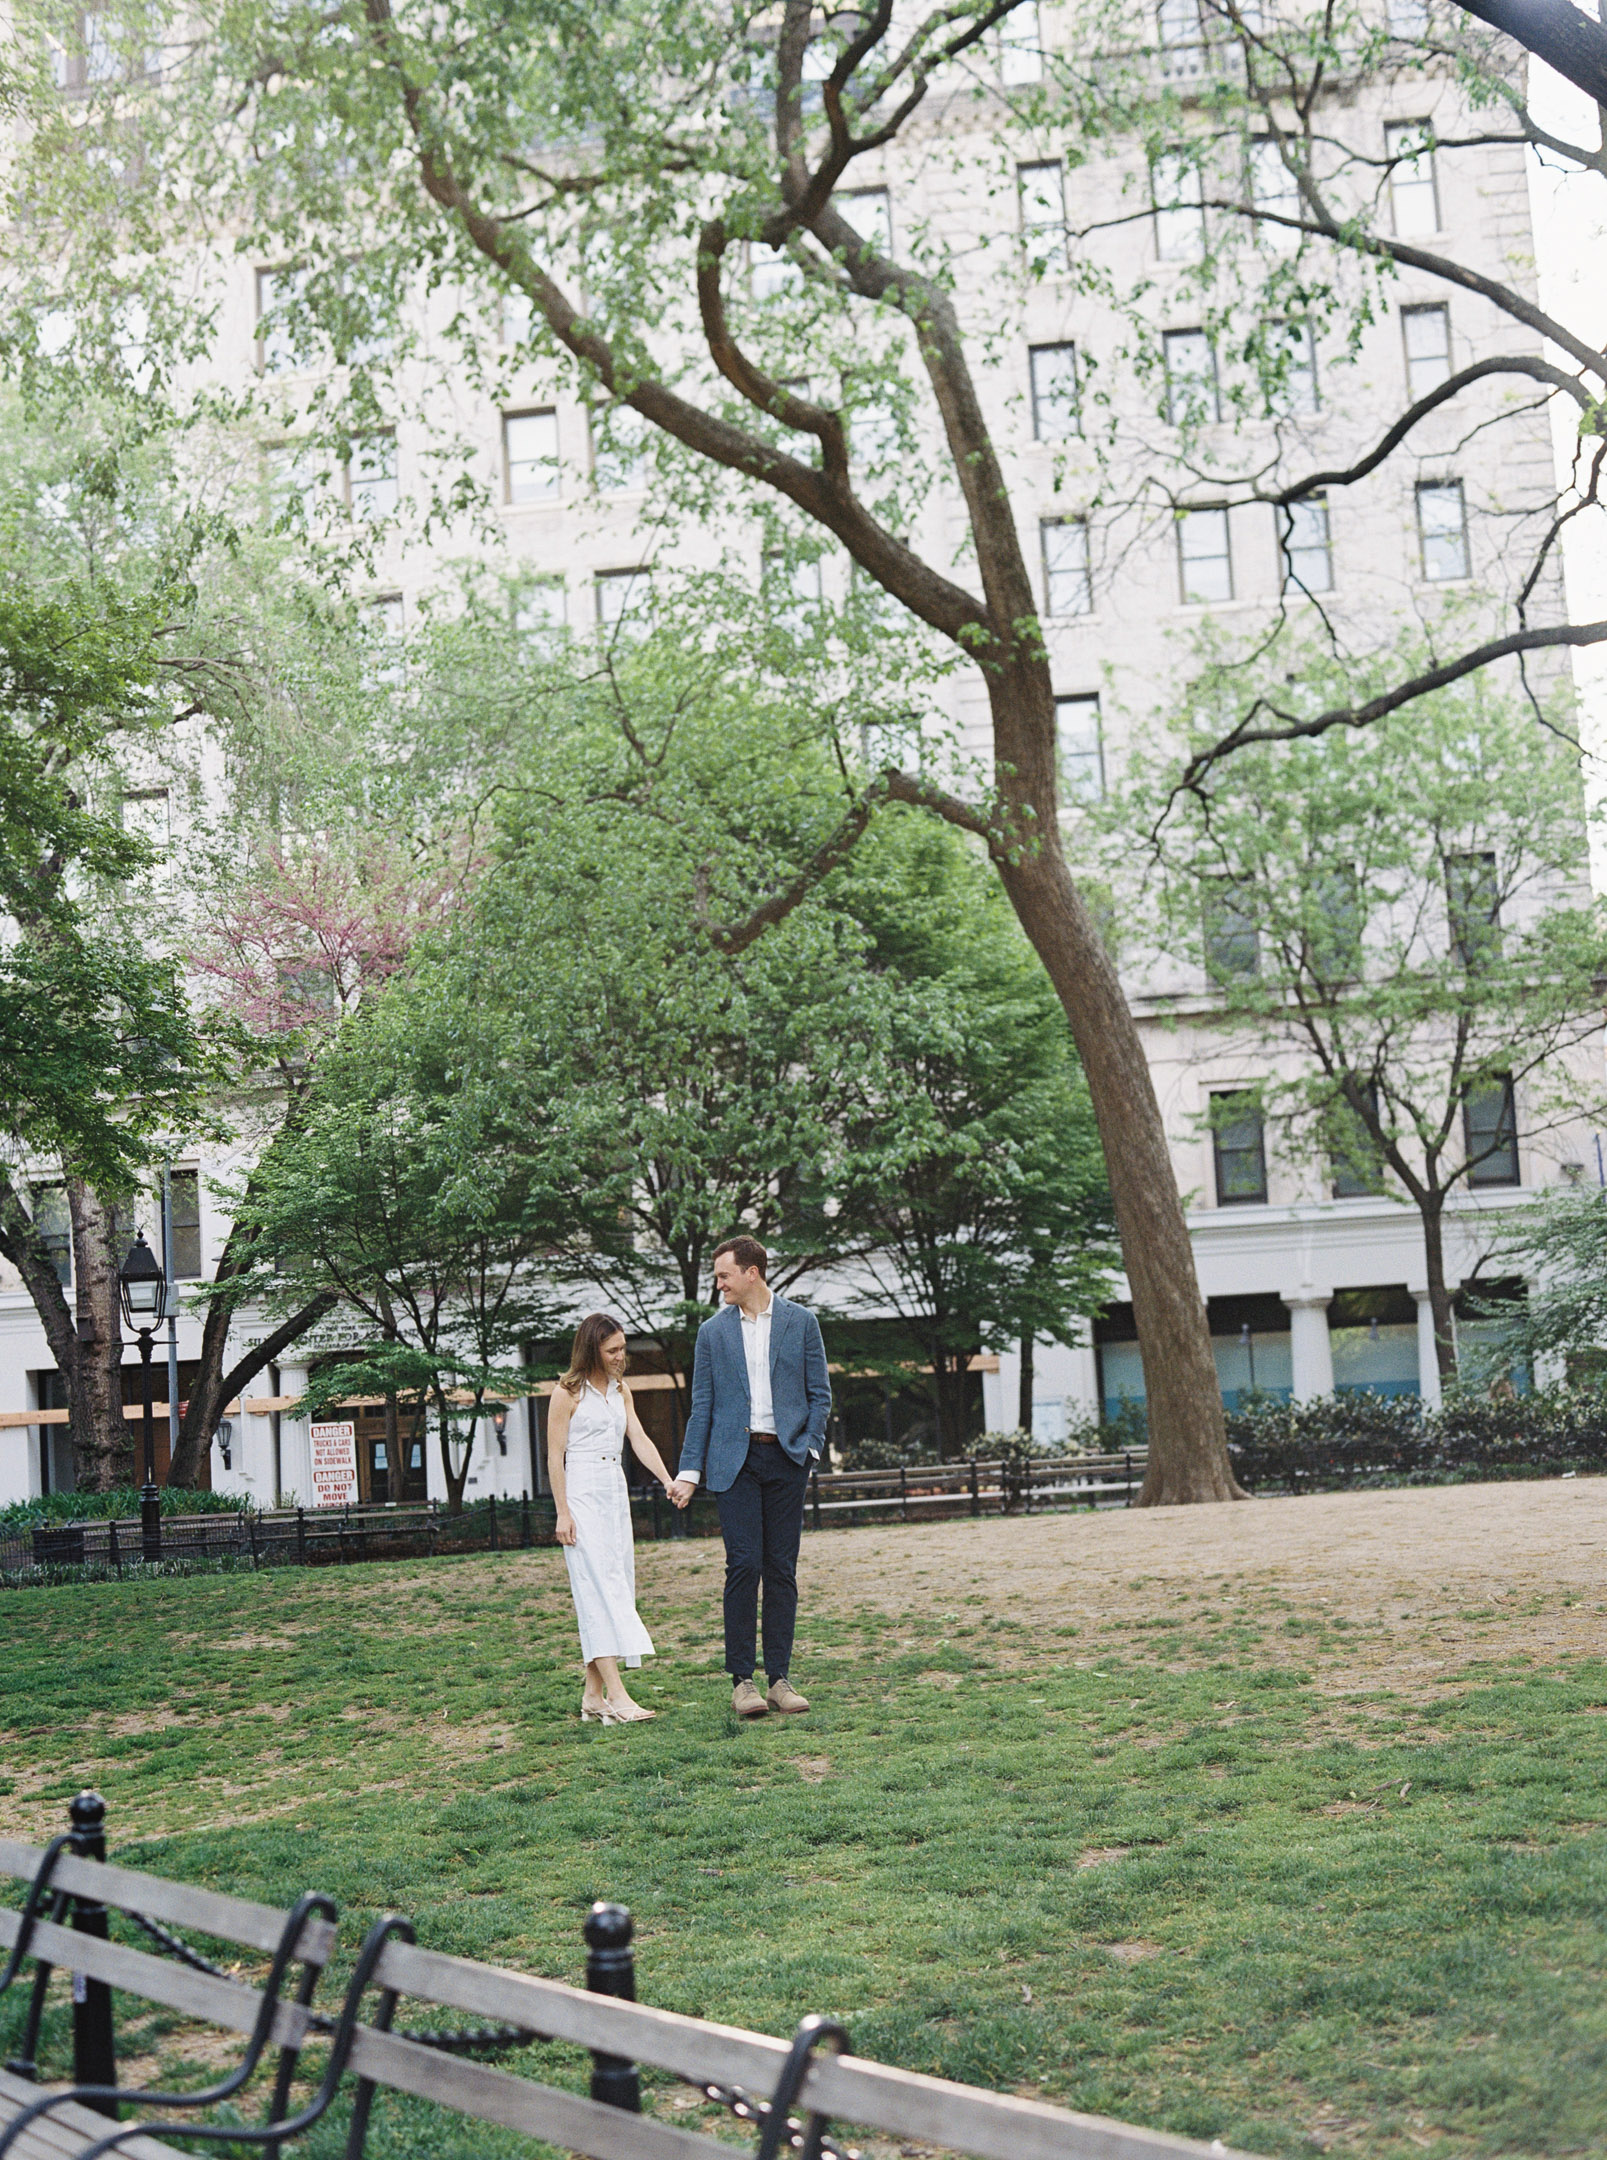 Kissing while walking during their Greenwich Village Engagement Session.